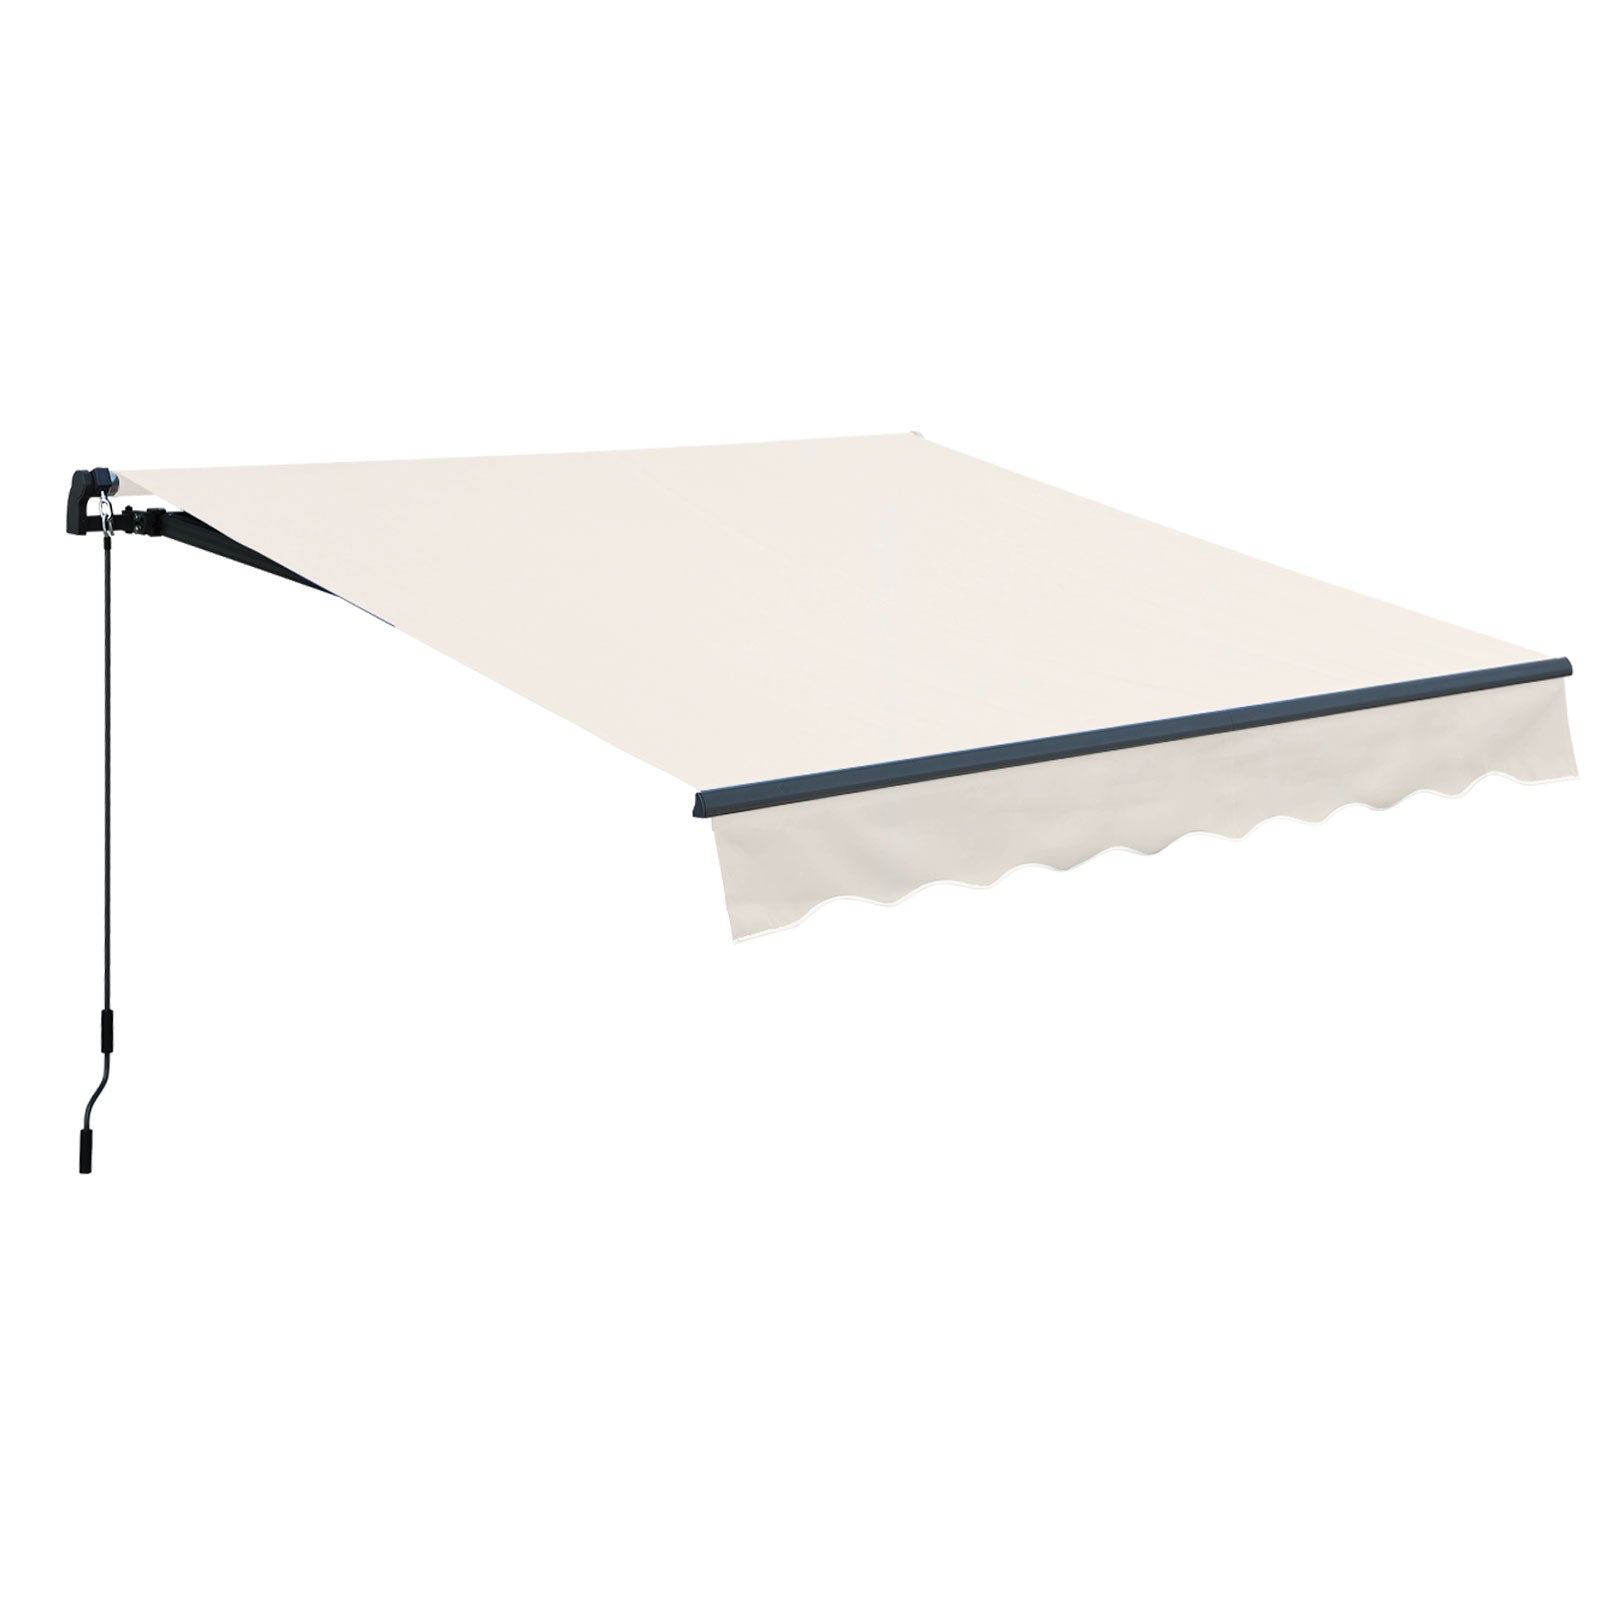 10' x 8' x 5' Retractable Window Awning Sunshade Shelter,Polyester Fabric,with Brackets and Two Wall Bases  Aoodor  khaki  